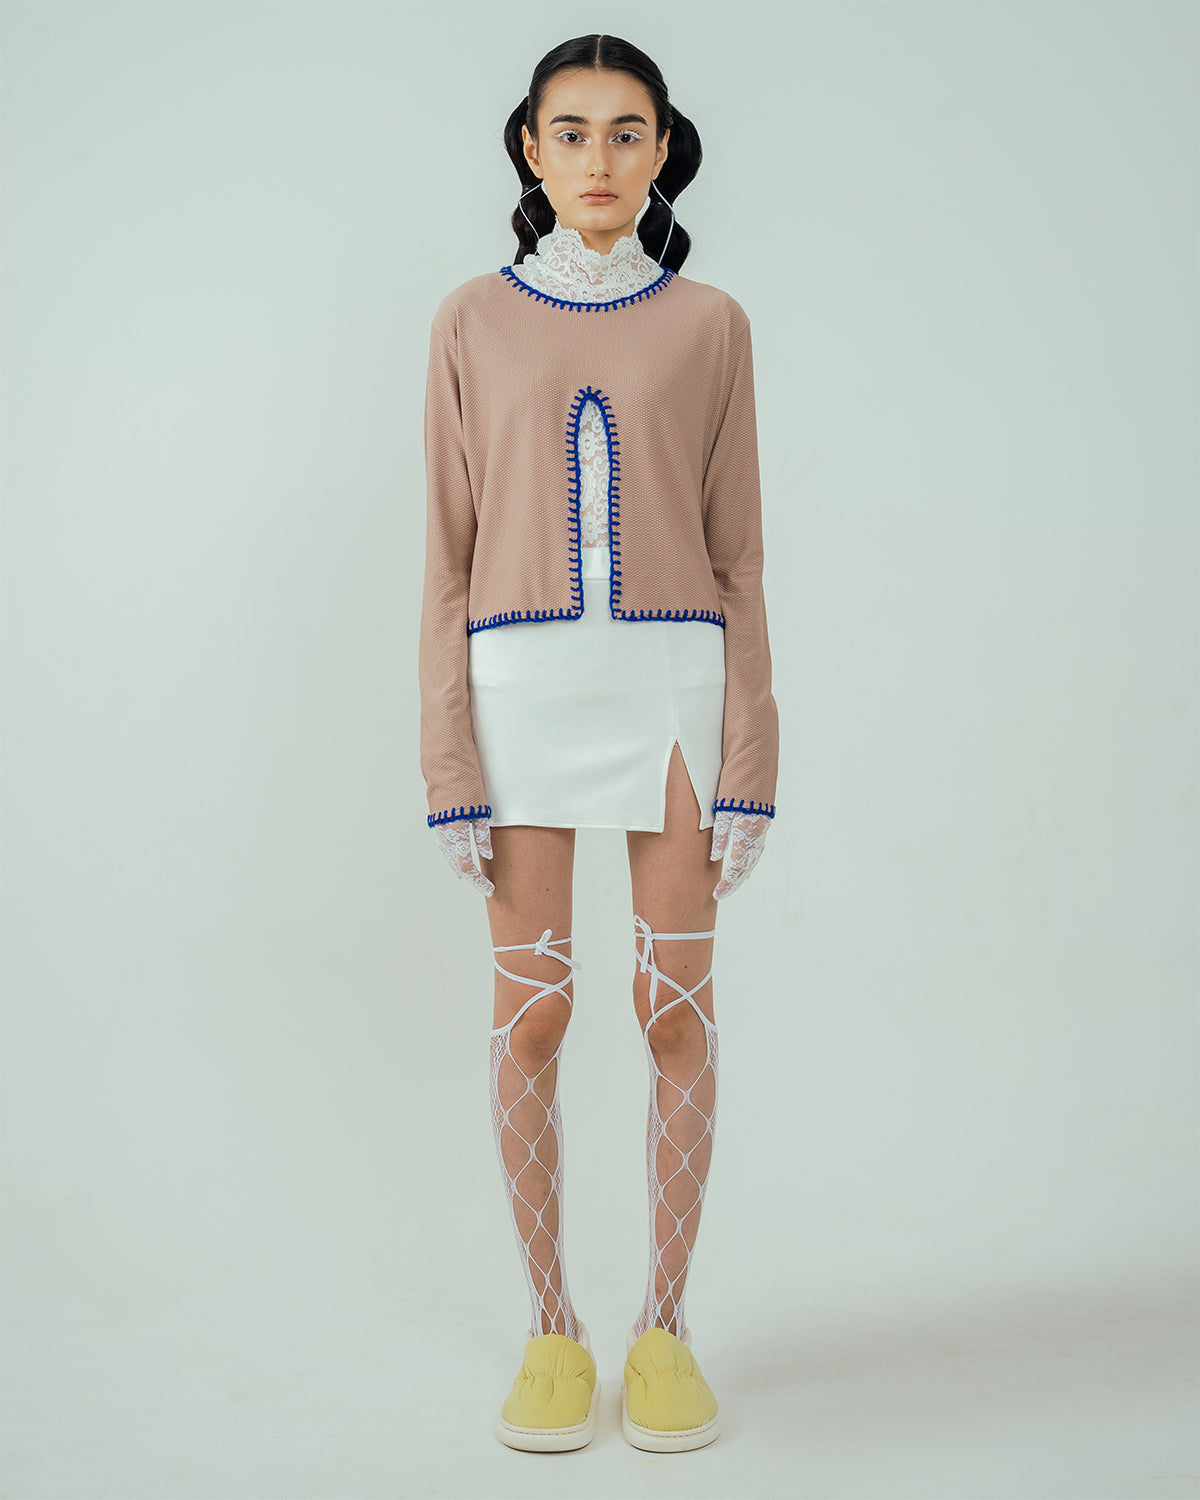 ​Pitchy Stitchy Slit Top Beige - High On Life